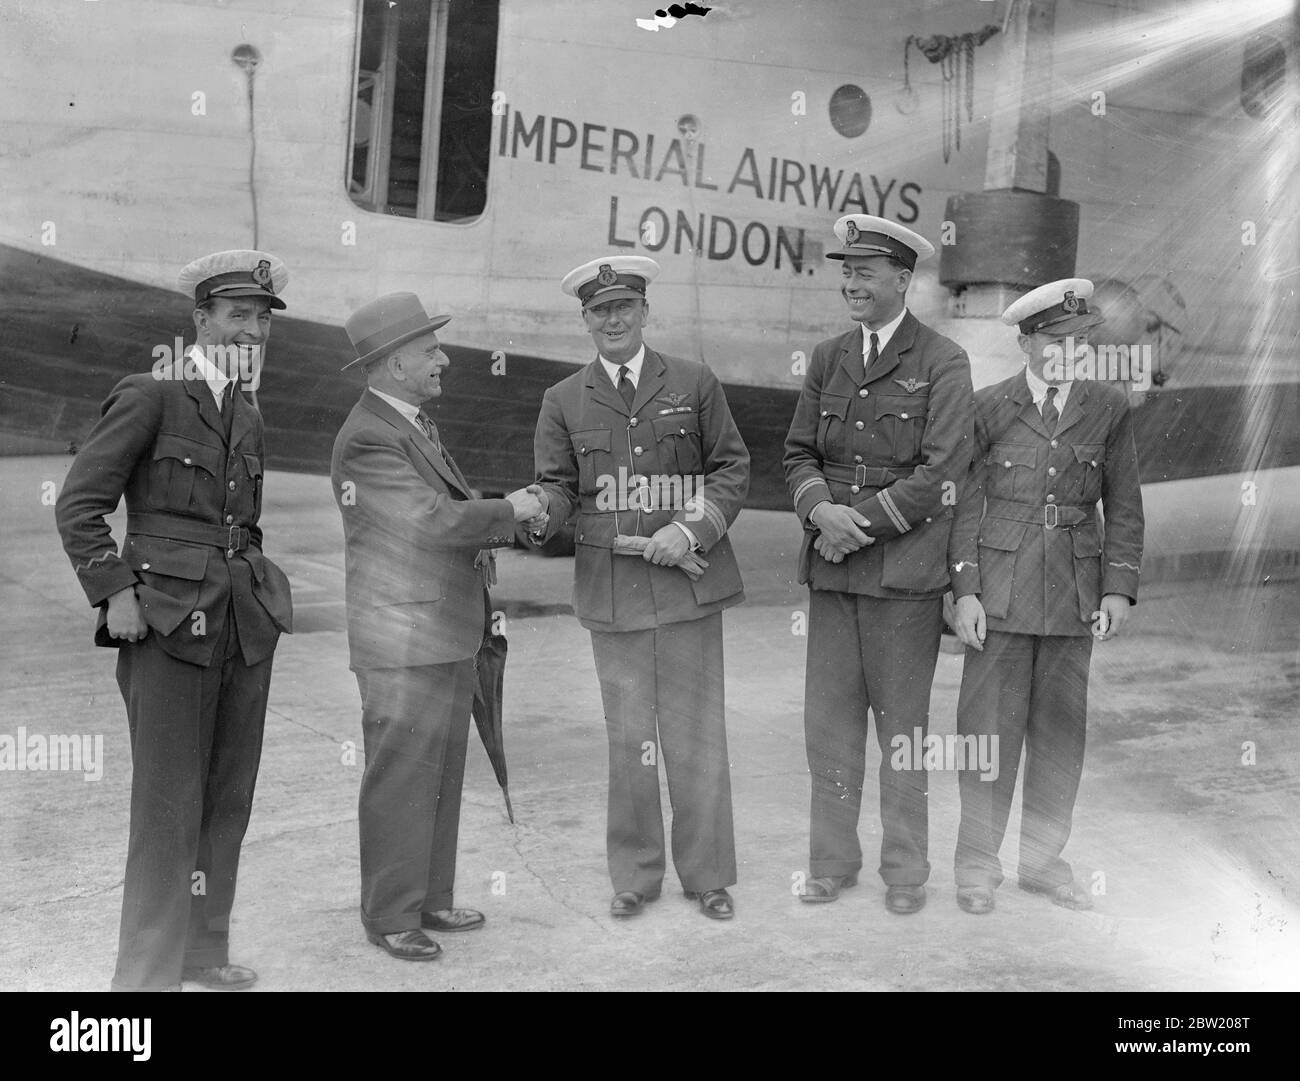 The Imperial Airways flying boat Caledonia arrived back at Southampton from the Foynes airbase, Ireland, after completing her first experimental doublecrossing of the Atlantic. The return ocean crossing was accomplished in 12 hours 7 minutes. The crew [Left to right: Radio operator Tommy Valetts, Captain A. S. Wilcockson, First Officer Bowes, and radio operator Hobbs] been greeted by deputy mayor of Southampton, councillor Saunders. 17 July 1937 Stock Photo